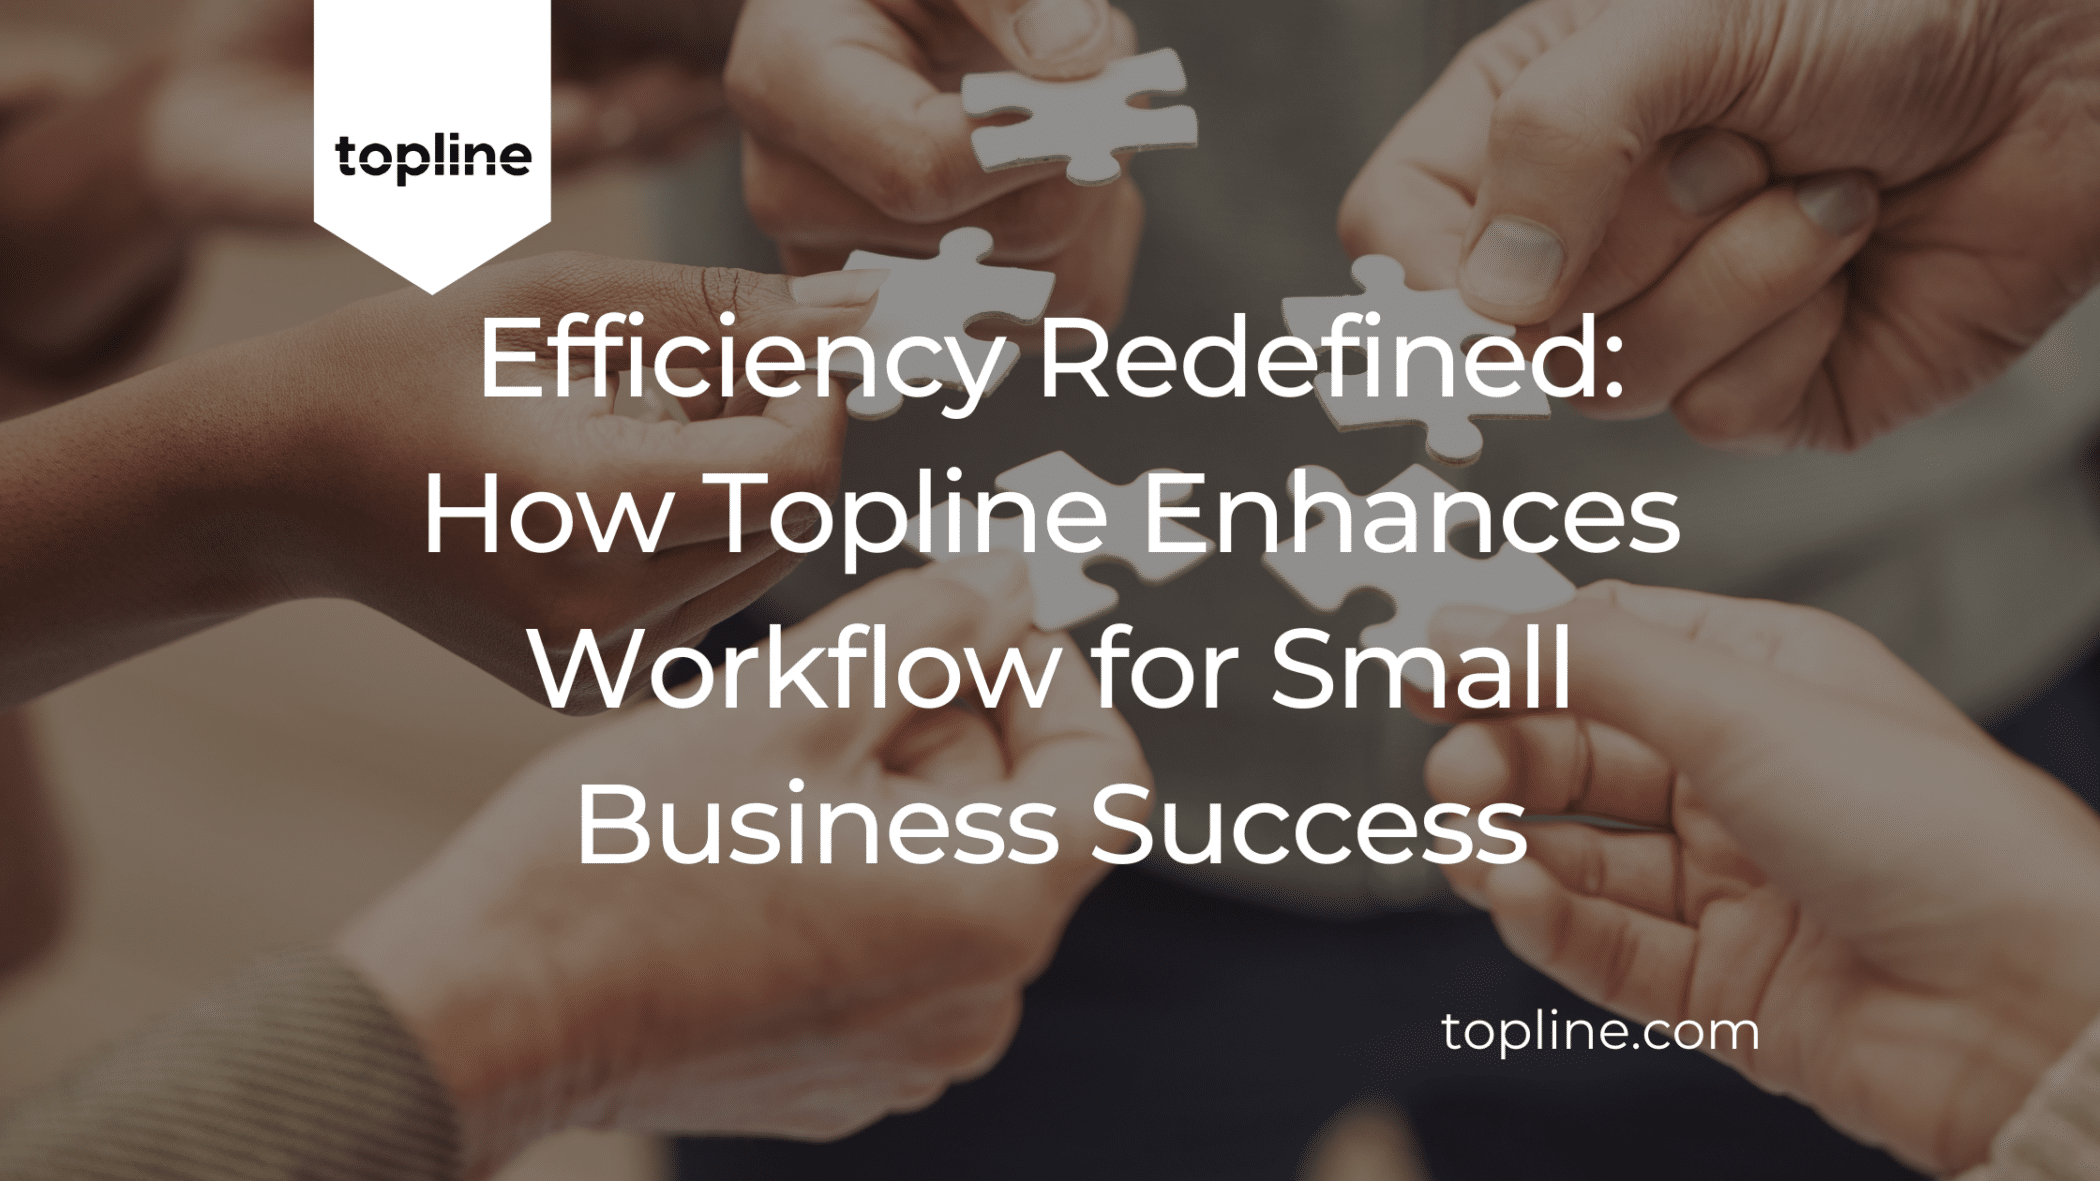 Efficiency Redefined: How Topline Enhances Workflow for Small Business Success